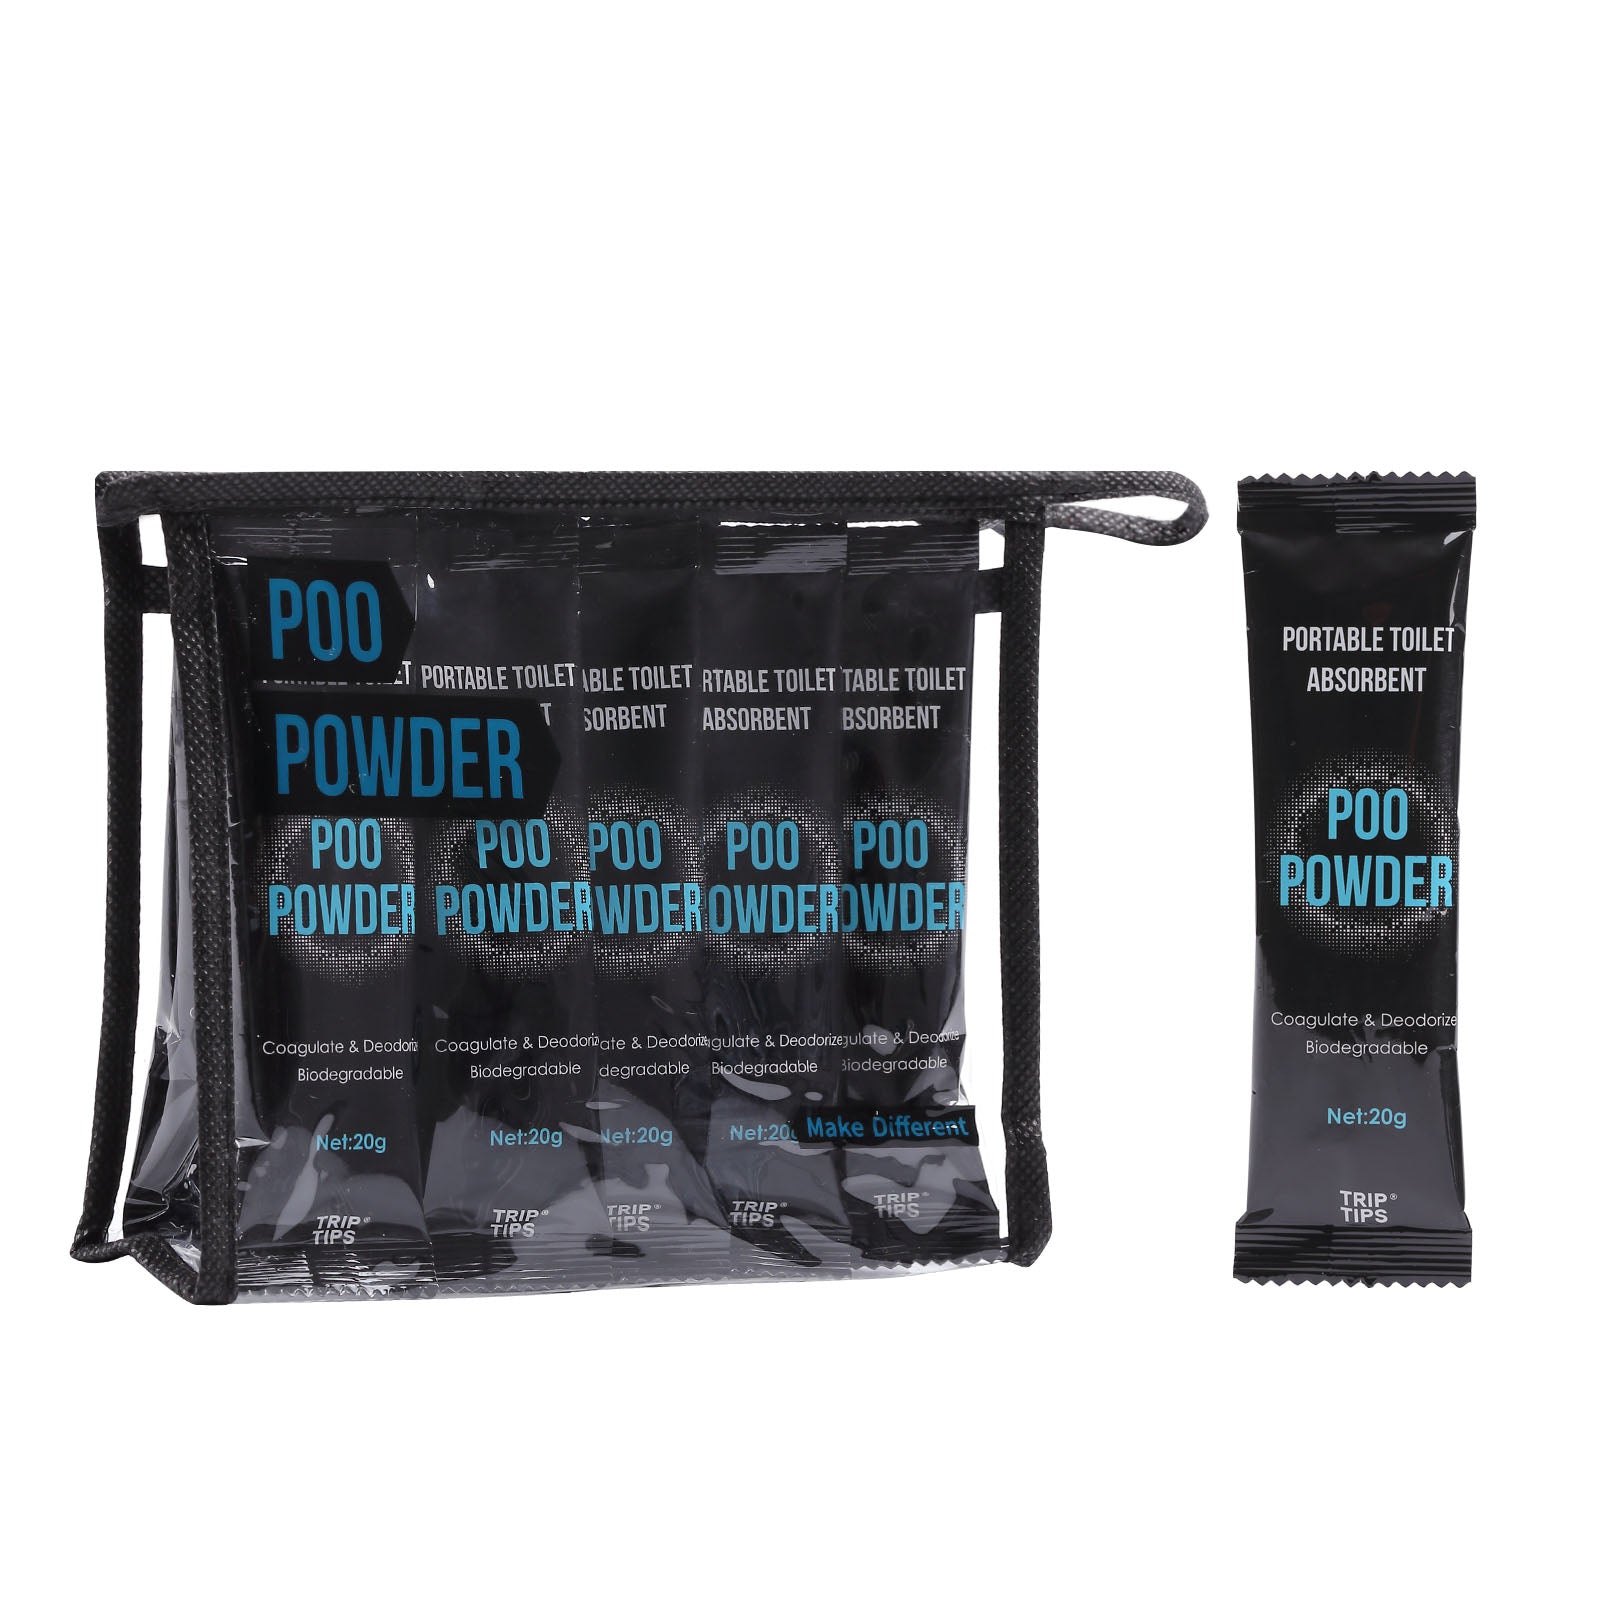 Poo Powder for Portable Toilet 20g /Pack, Camping Toilet Chemicals Quick Super Absorb, Eco Gel for Portable Toilet Chemicals Deodorant, Poop Gel Camping, Pee Gel for Camping Portable Toilet Gel 10 Pcs